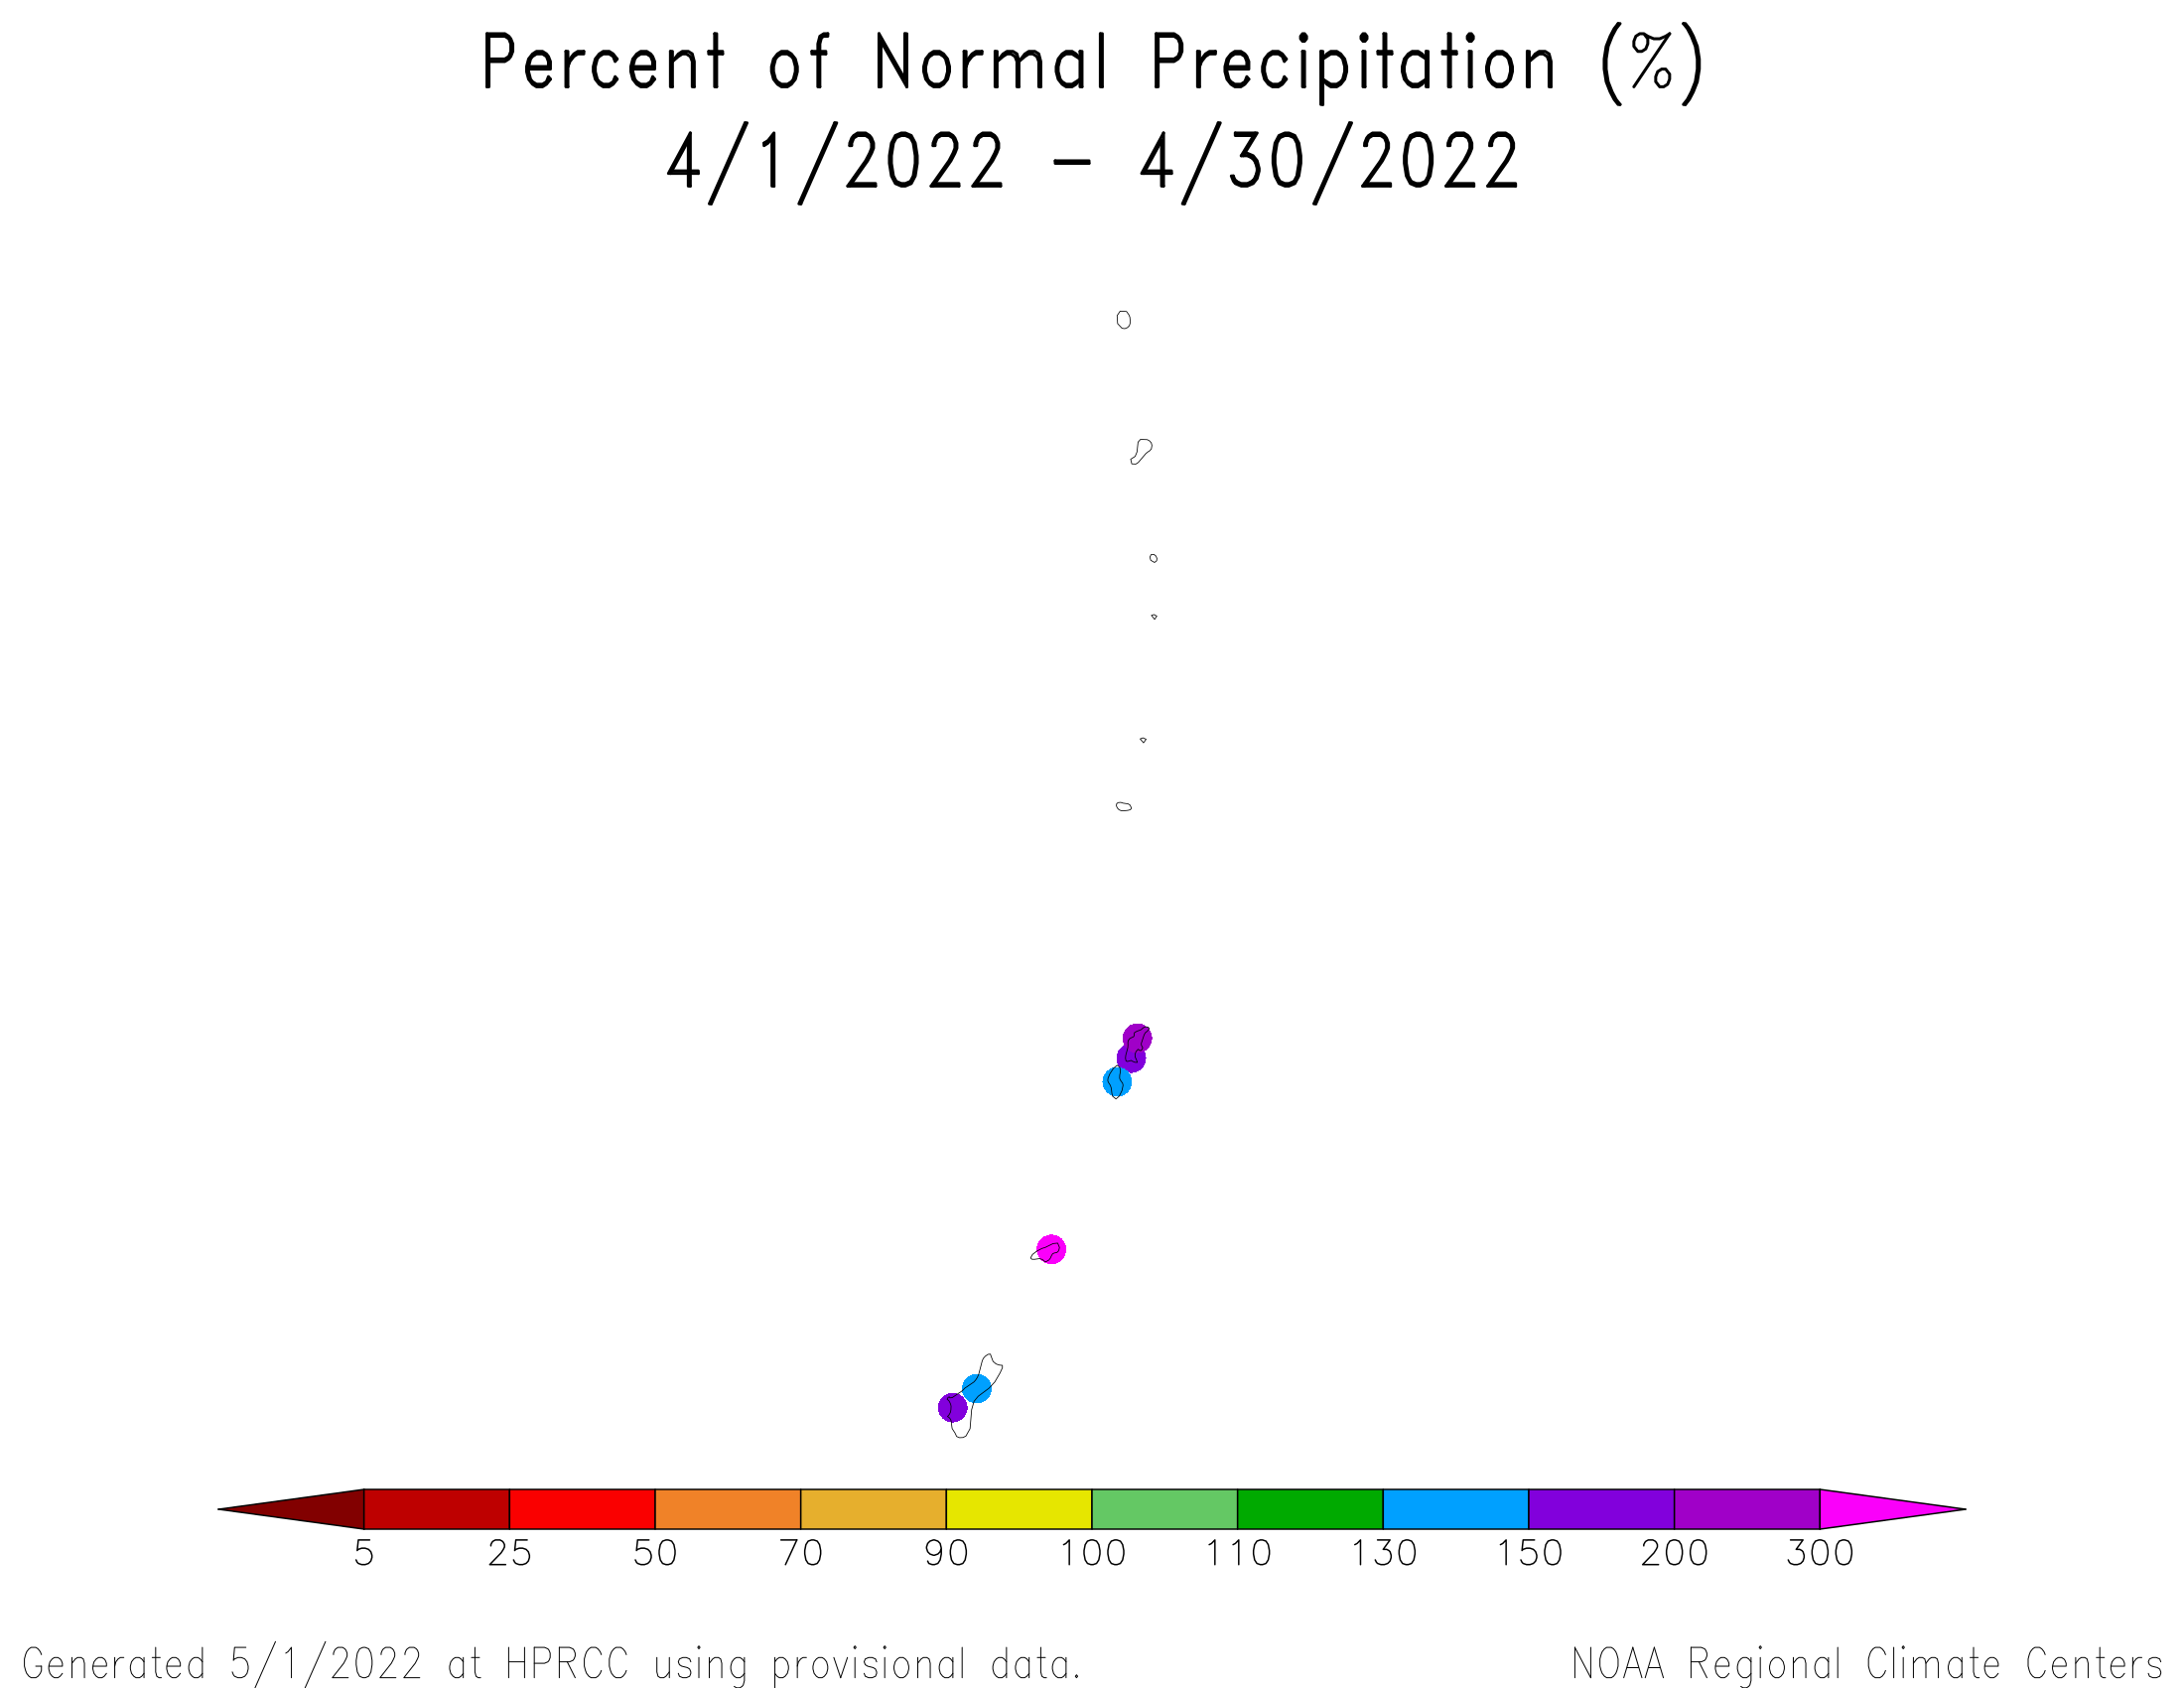 1-month Percent of Normal Precipitation for the Marianas